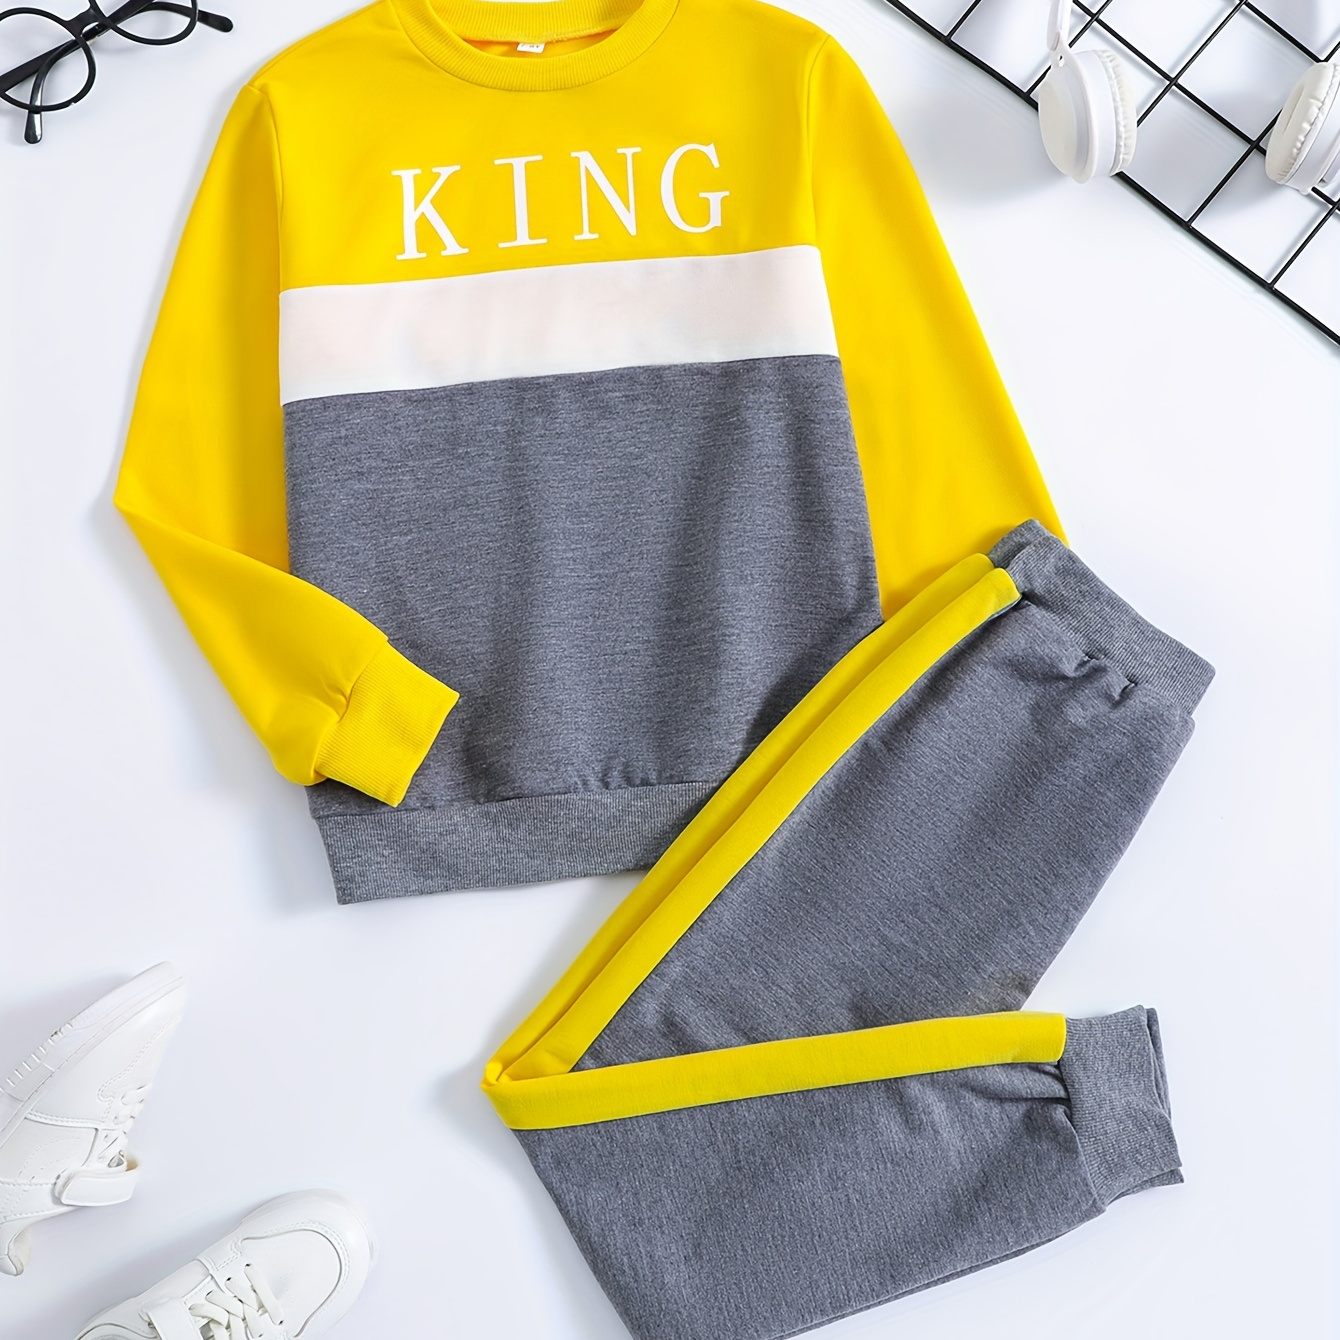 

2pcs Boy's Color Block Stitching Outfit, King Print Sweatshirt & Track Pants Set, Casual Long Sleeve Top, Kid's Clothes For Spring Fall Winter, As Gift